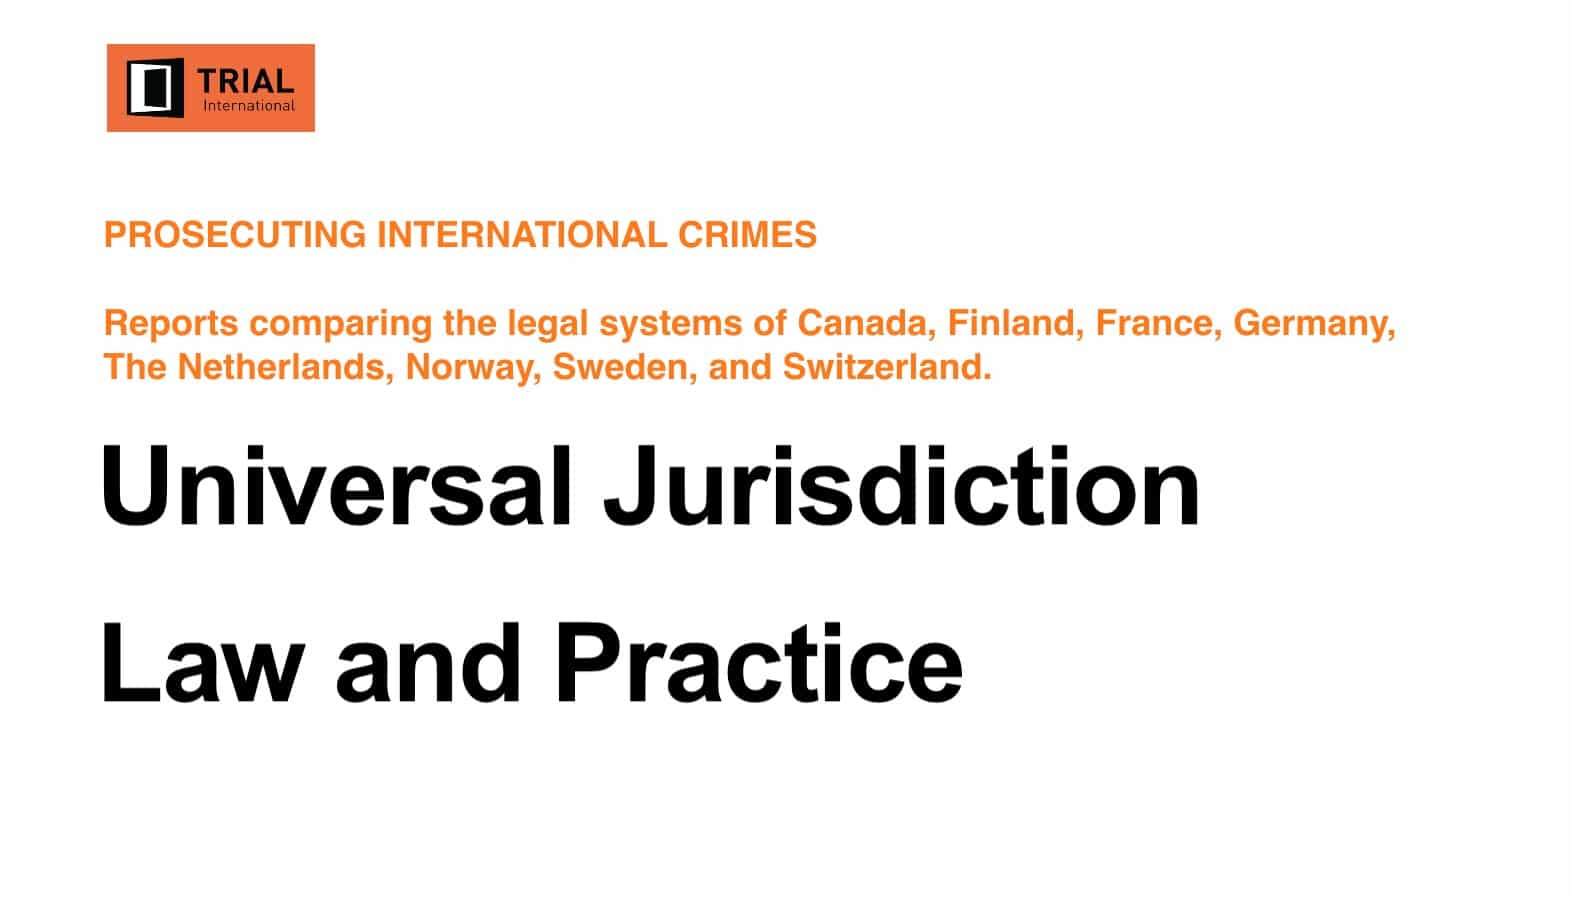 TRIAL INTERNATIONAL — PROSECUTING INTERNATIONAL CRIMES: Comparing the legal systems of Canada, Finland, France, Germany, The Netherlands, Norway, Sweden, and Switzerland.